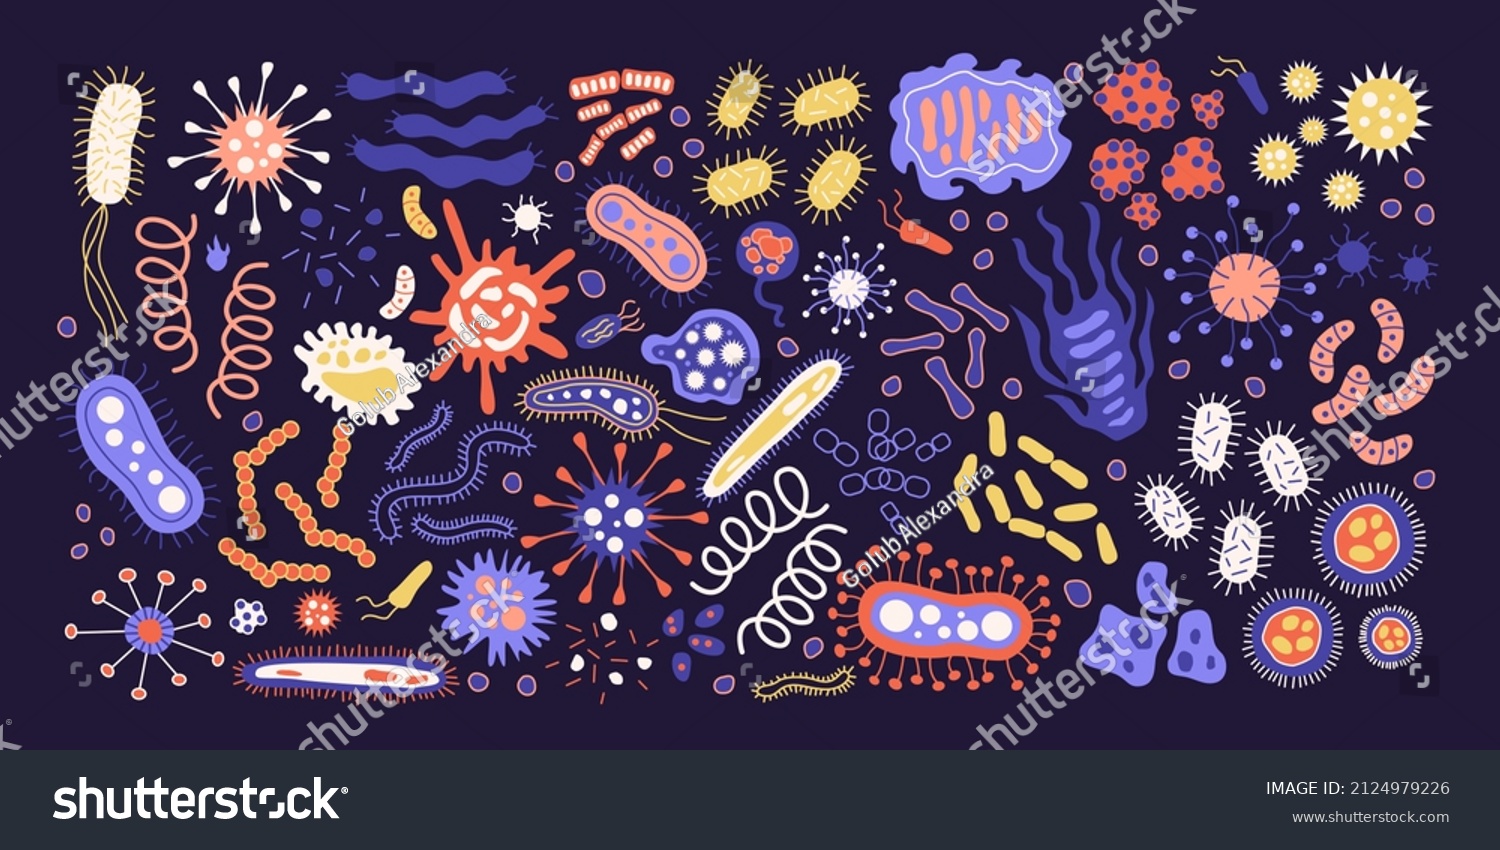 Set of different Bundle of infectious microorganisms isolated. Cartoon collection of infectious germs, protests, microbes. A bunch of diseases that cause bacteria, viruses. Isolated flat illustration. #2124979226